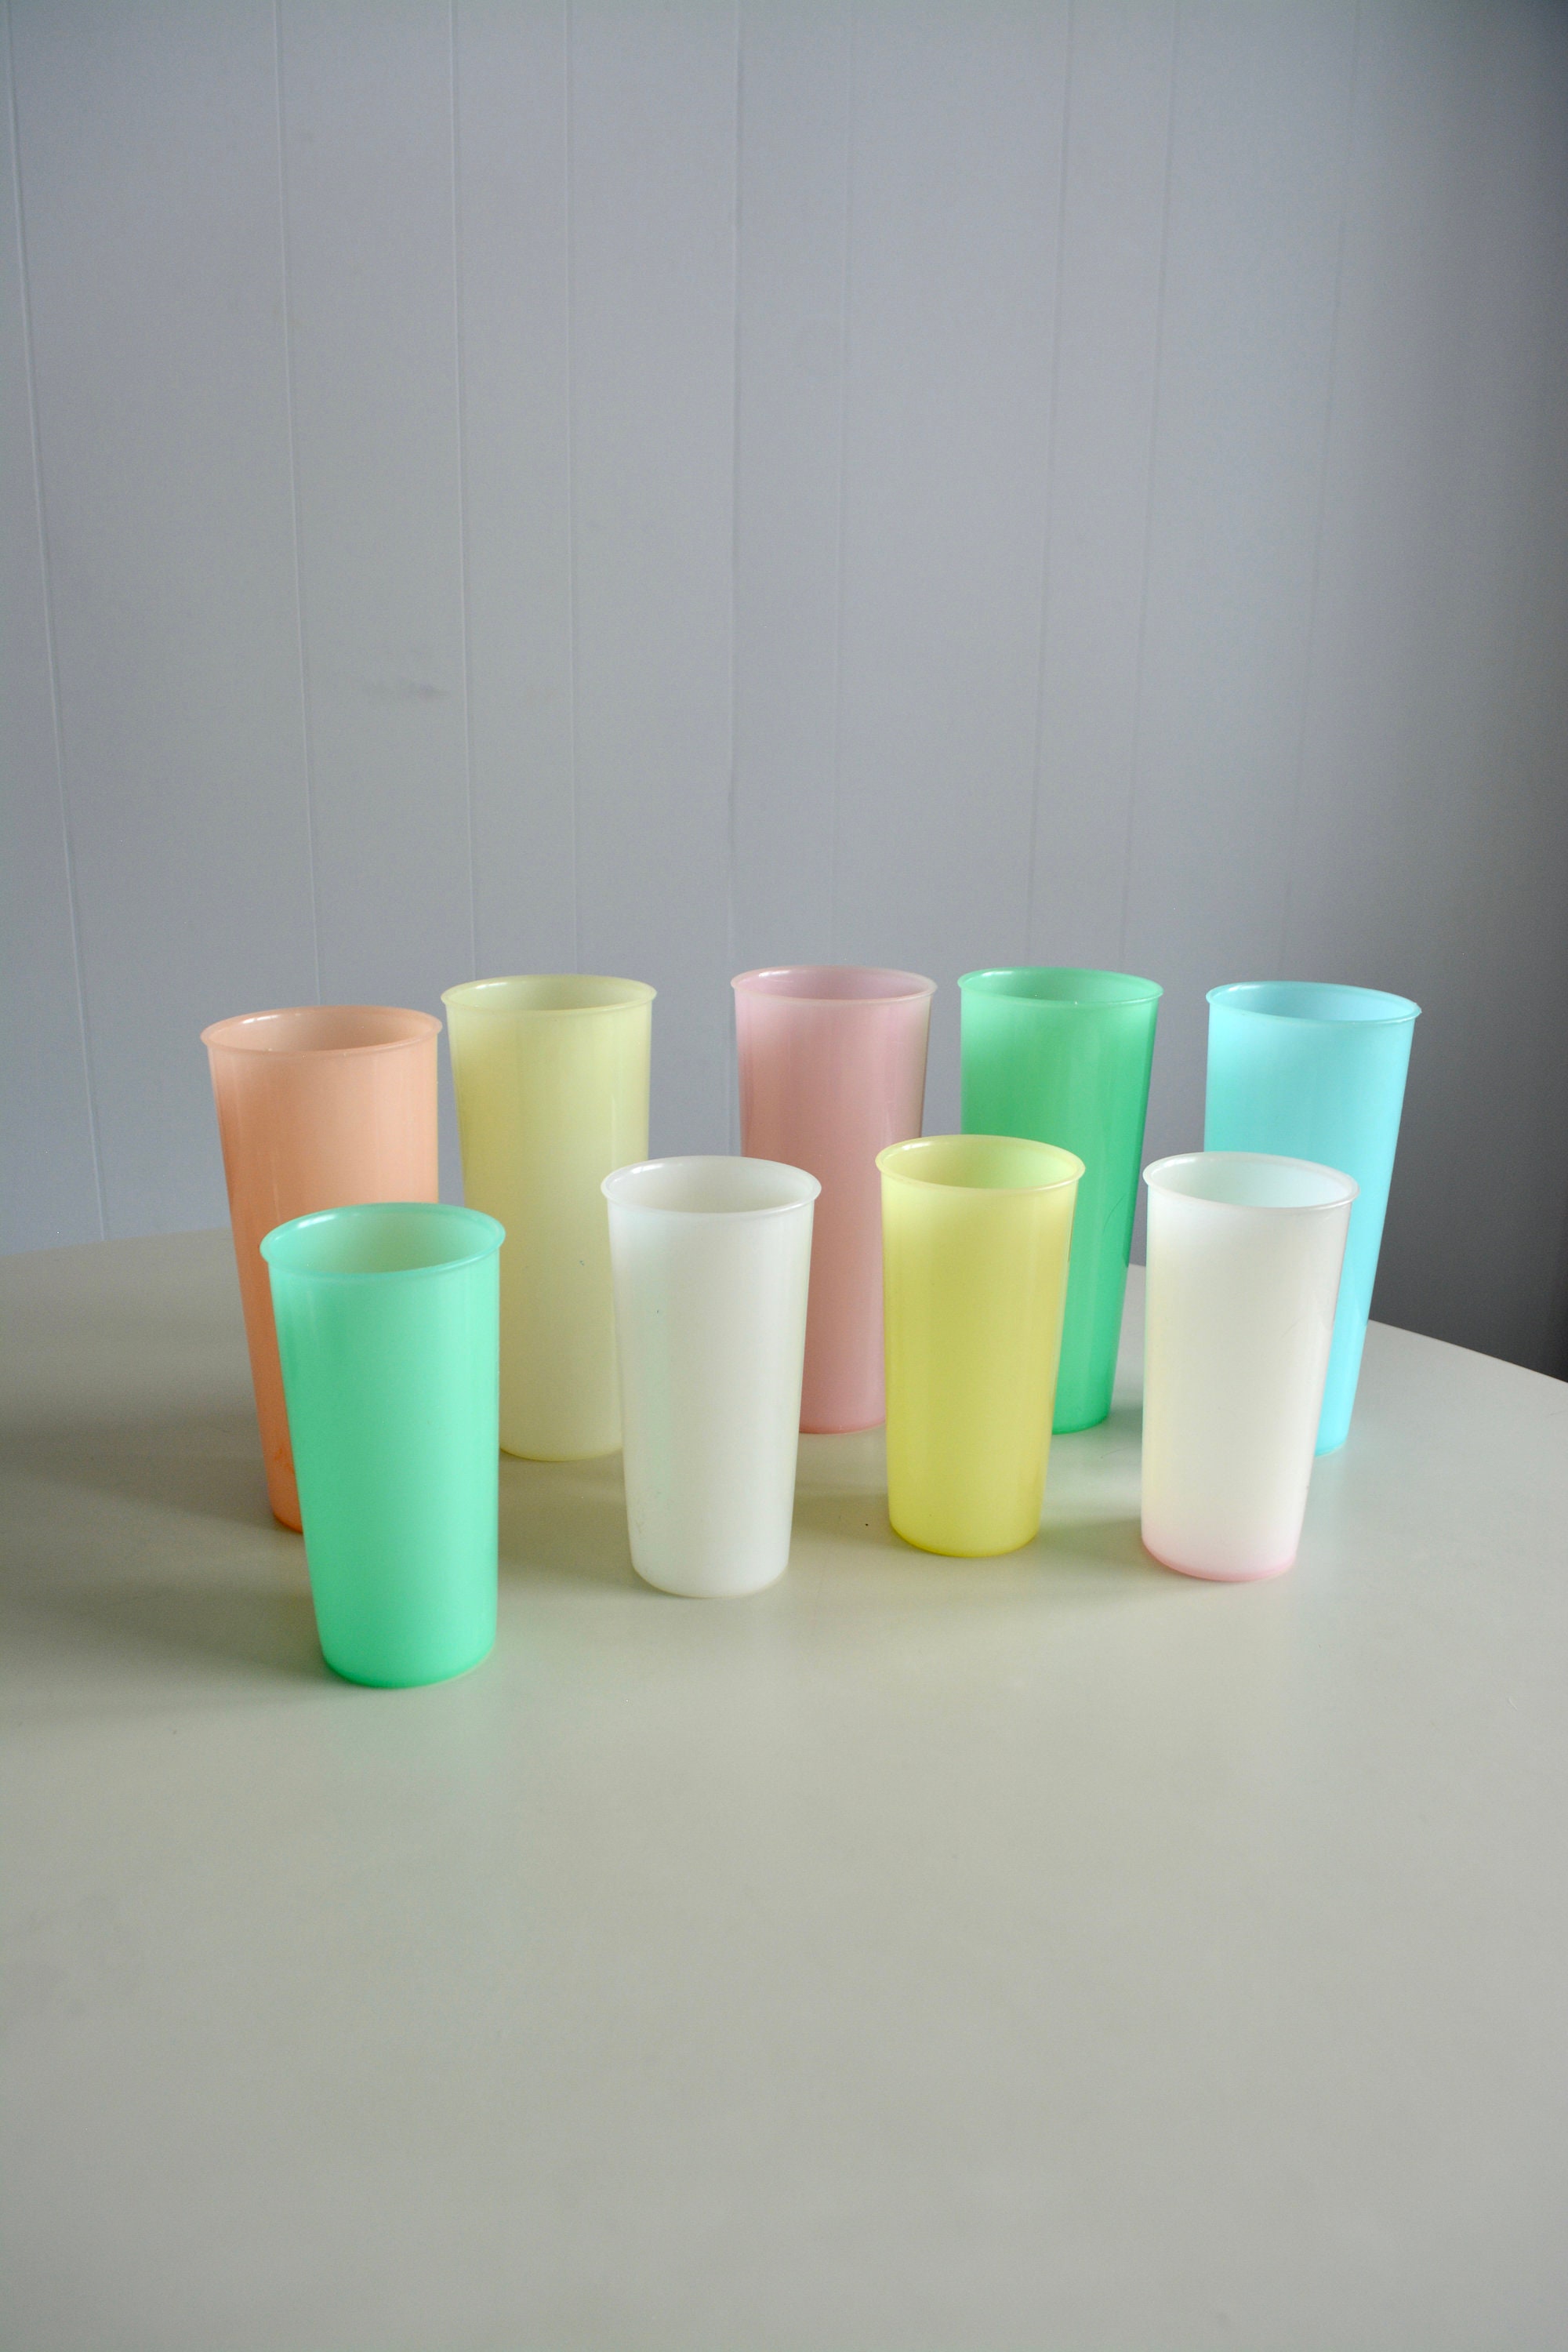 Water Glasses Drinking Glasses Sunset Tumbler Iced Coffee Cups Tea Mug  Glass Cup With Colored Ball For Restaurant Party - Buy Water Glasses  Drinking Glasses Sunset Tumbler Iced Coffee Cups Tea Mug